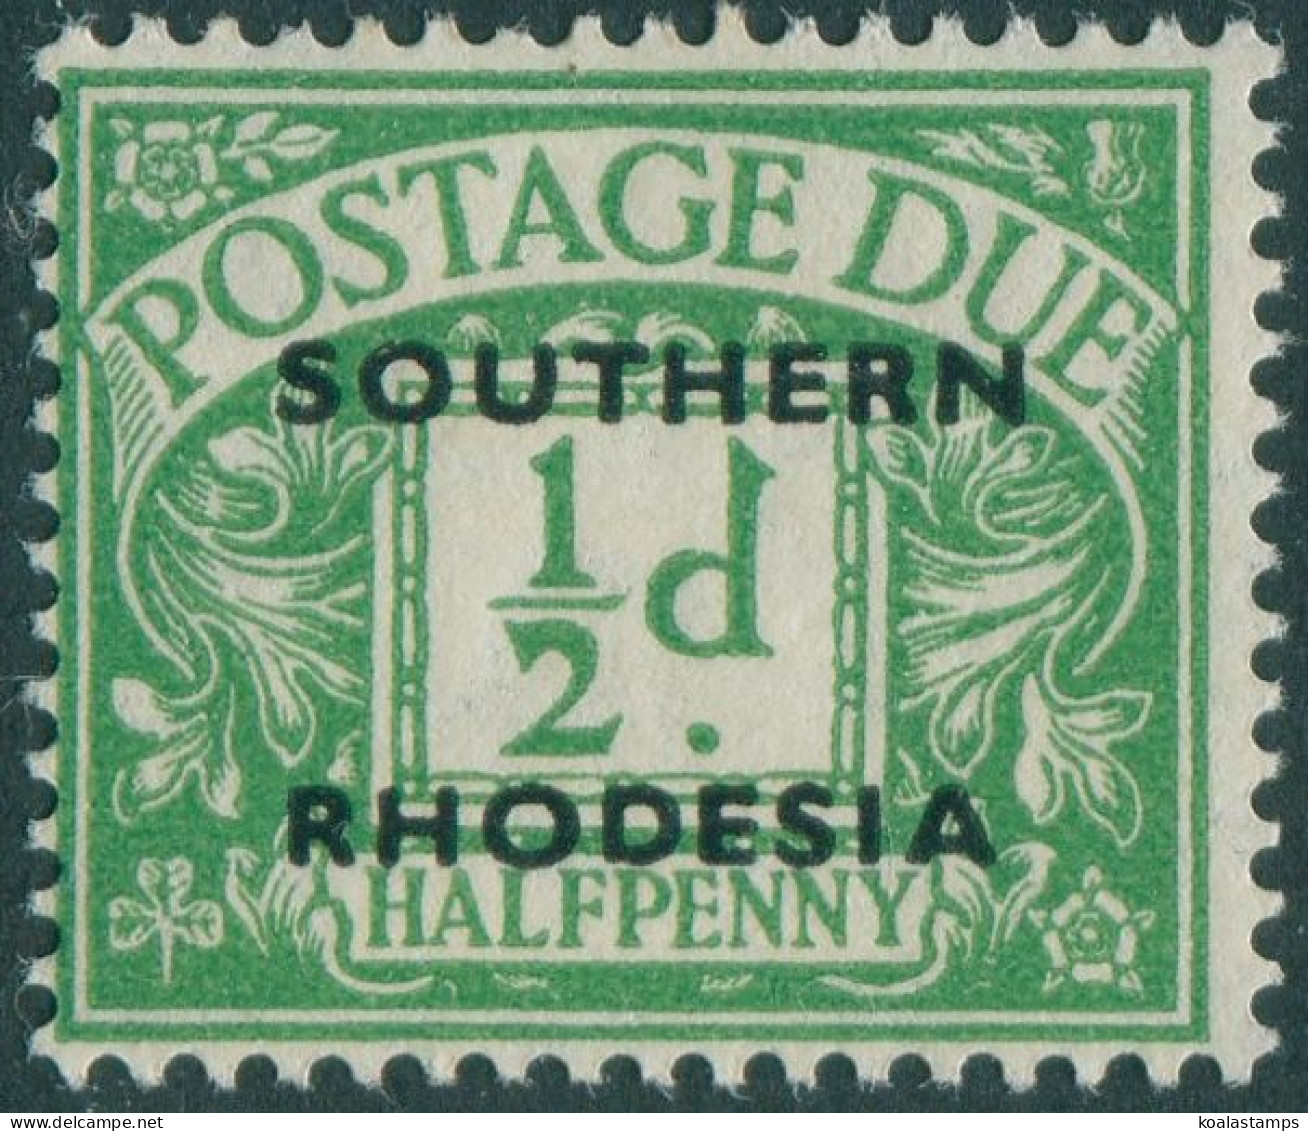 Southern Rhodesia Due 1951 SGD1 ½d Emerald SOUTHERN RHODESIA Ovpt MLH - Zimbabwe (1980-...)